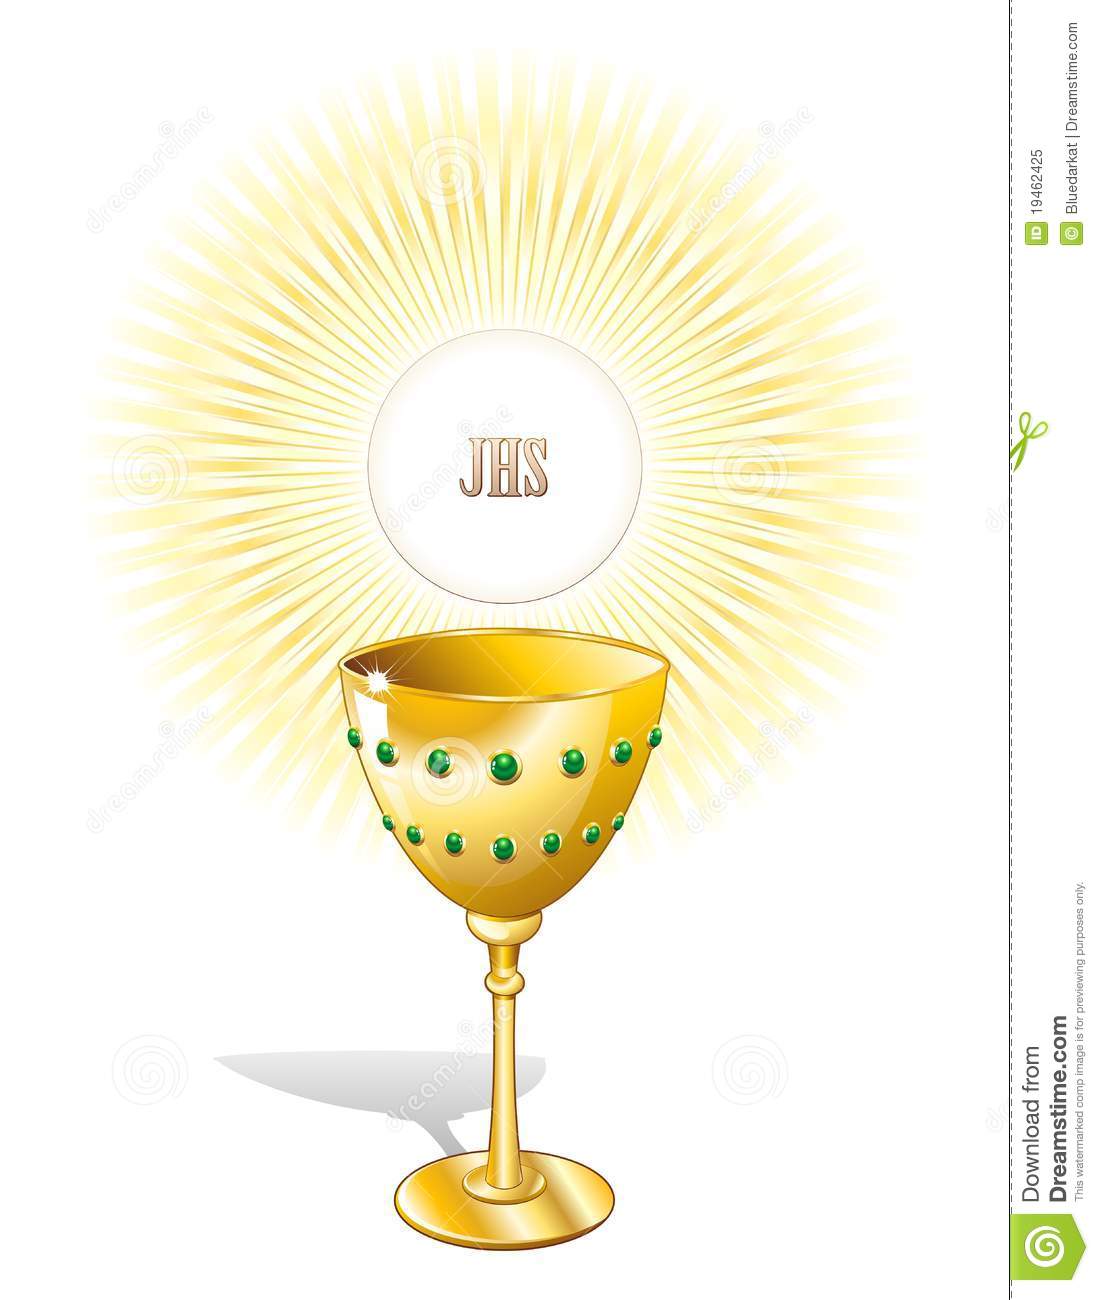 Religion Chalice Cup And Host Royalty Free Stock Photo   Image